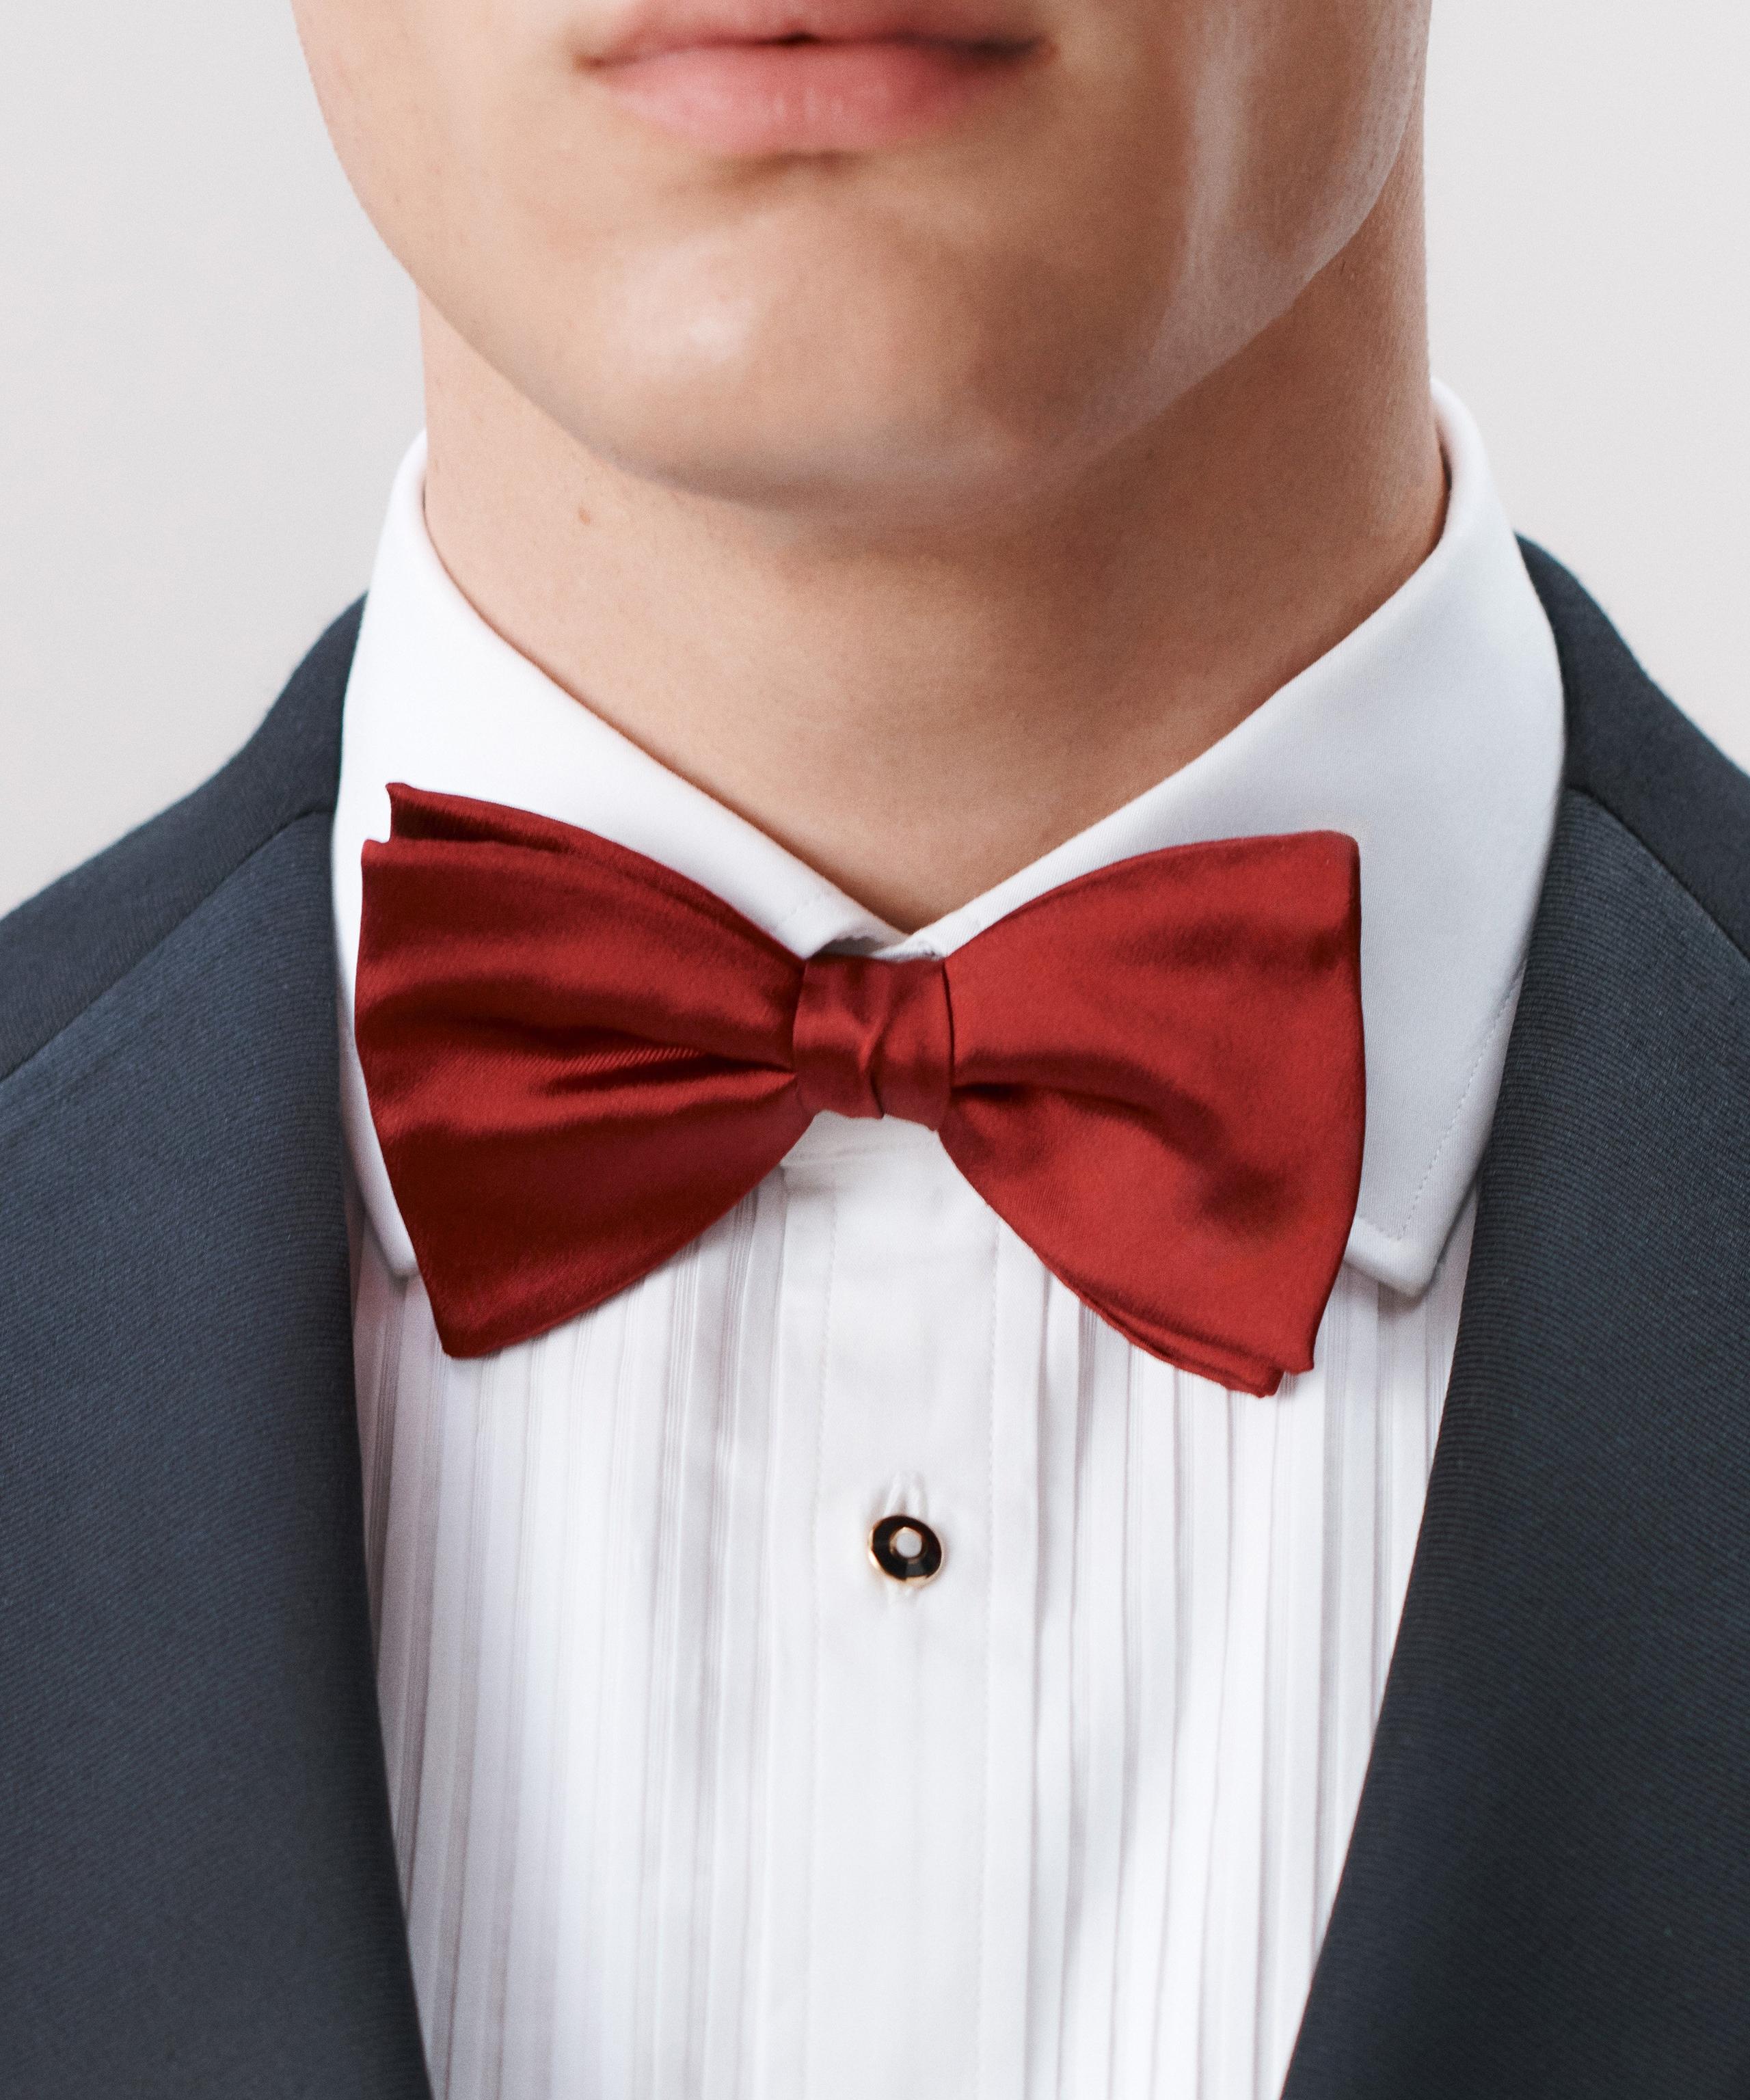 A close up of a man wearing a black evening jacket, white evening shirt with a red bow tie